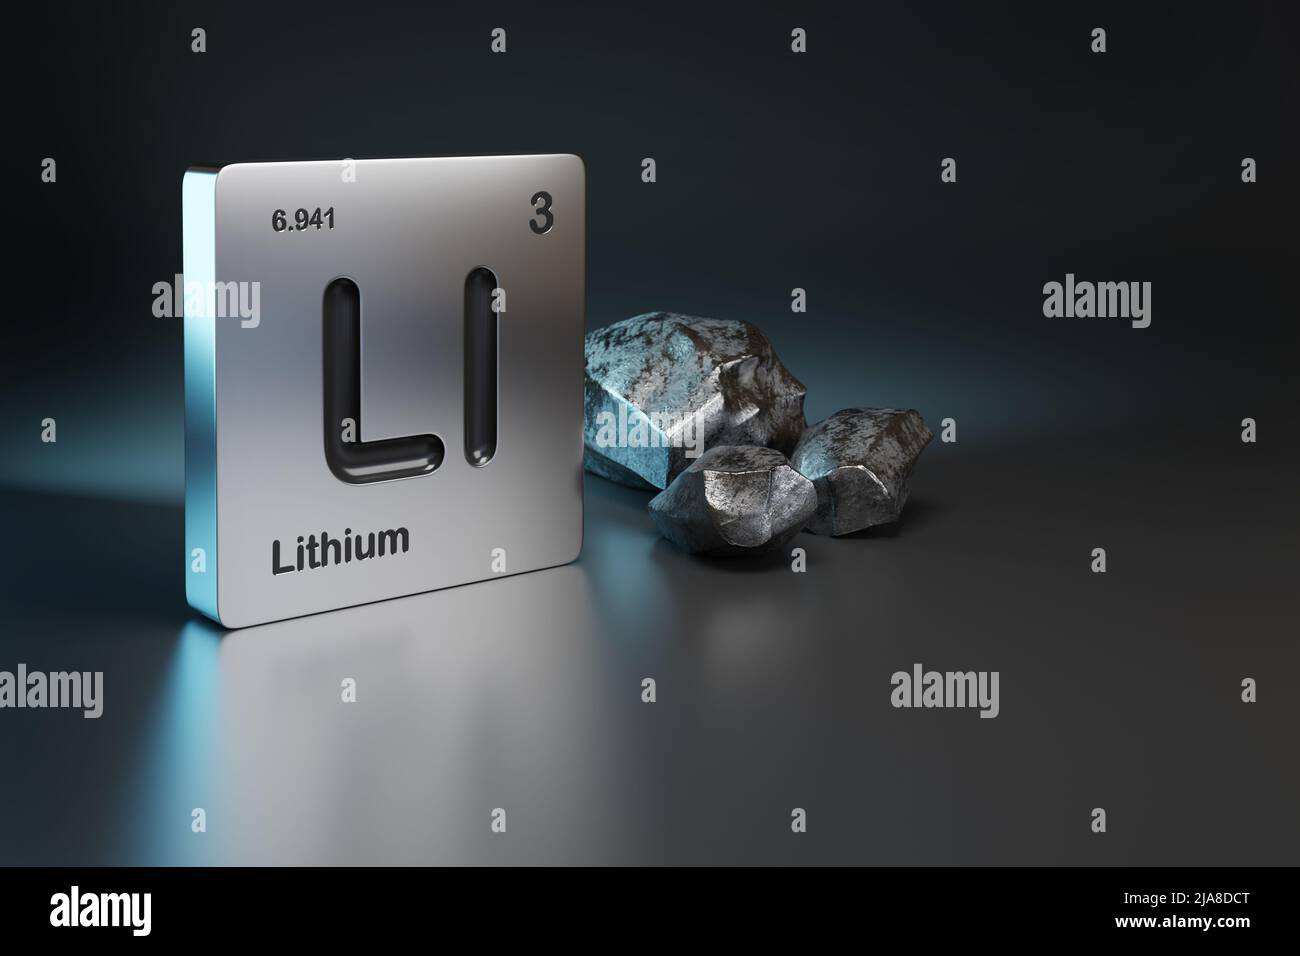 Lithium element symbol from the periodic table near metallic lithium with copy space. 3d illustration. Stock Photo